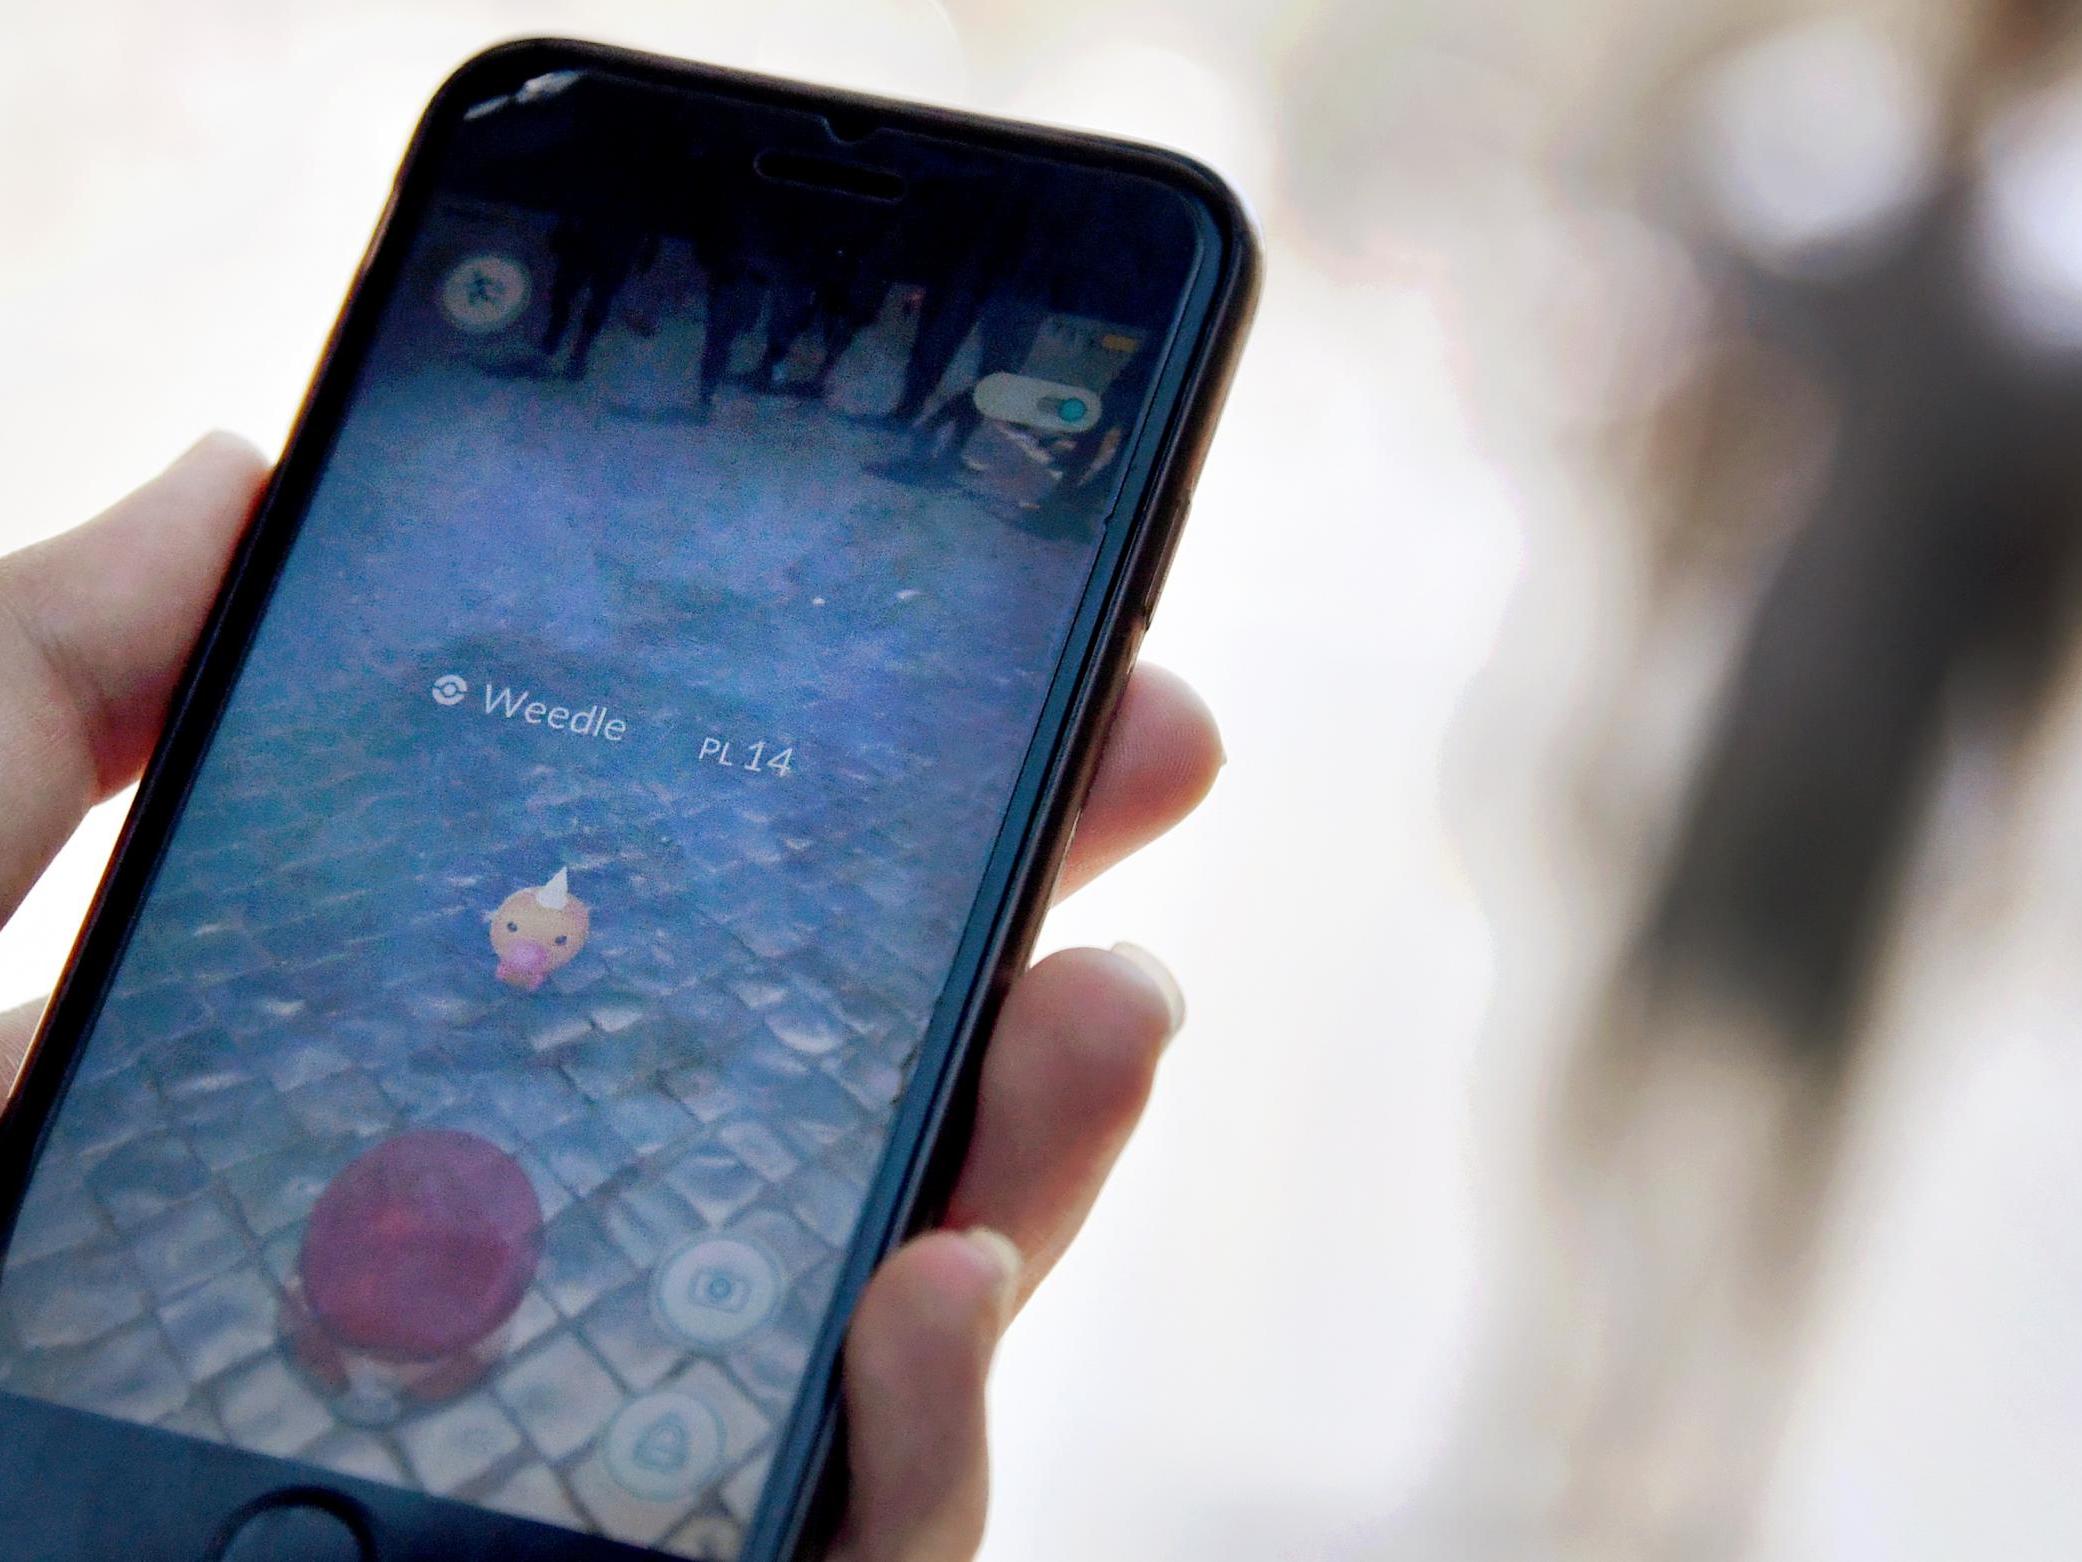 A man suffered serious injuries after falling onto train tracks while playing Pokemon Go